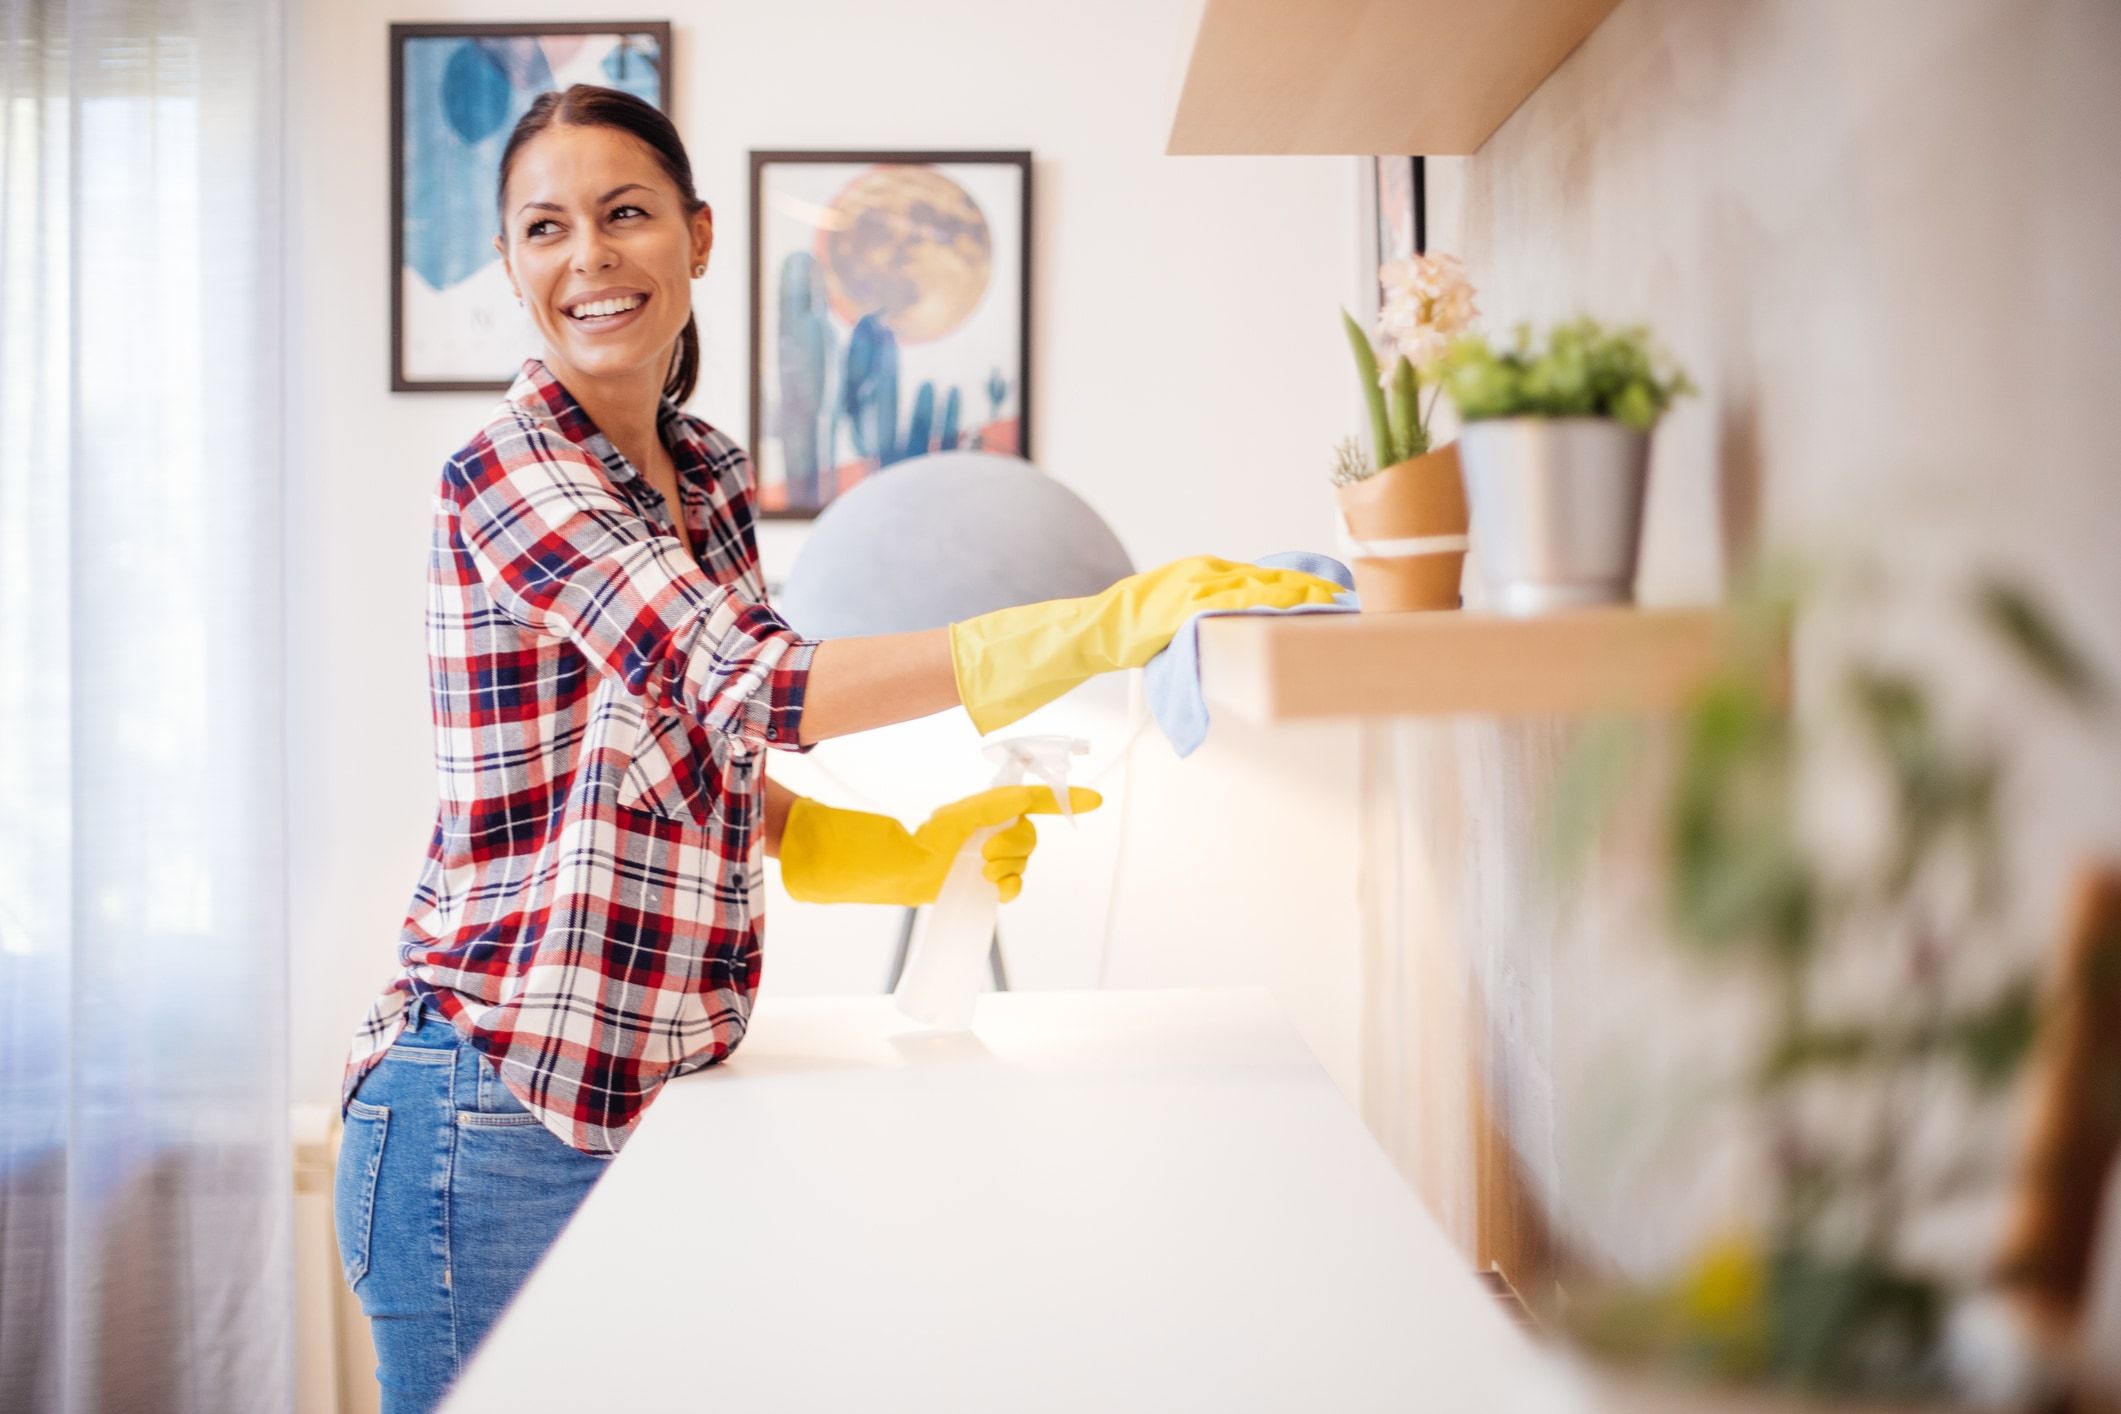 How to handle taxes when you hire a housekeeper